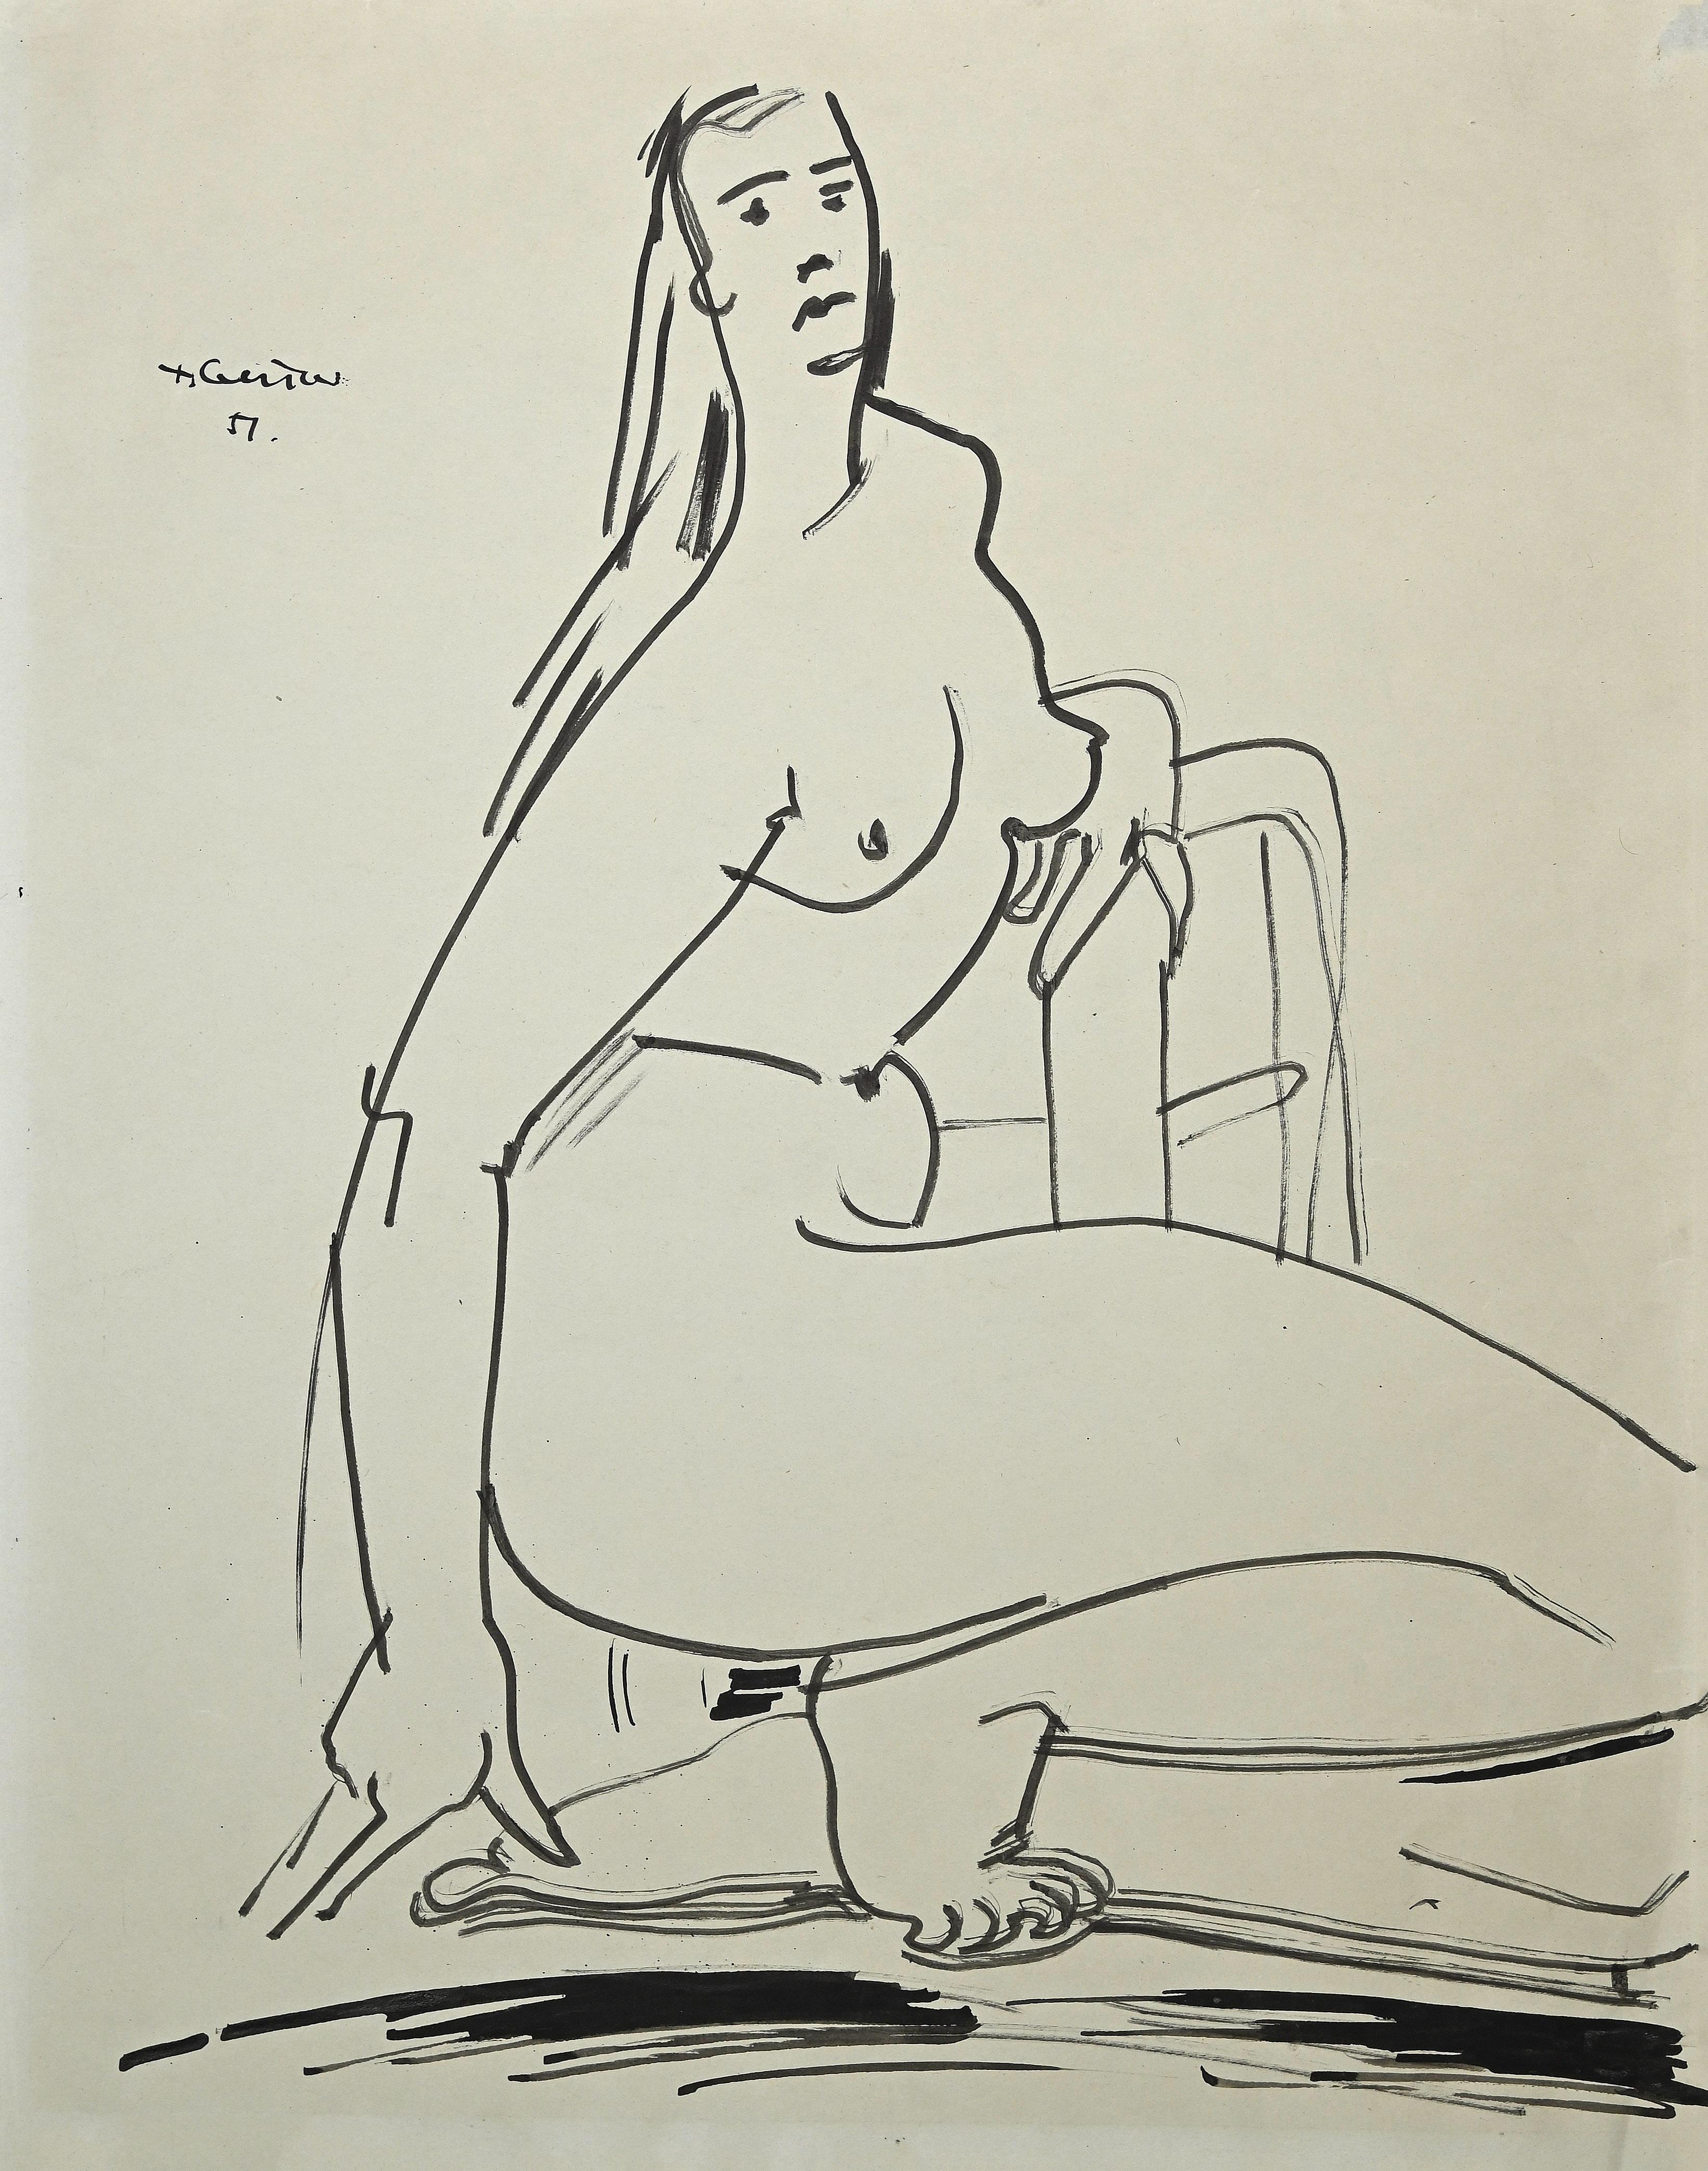 Internal Nude is an original china ink drawing on ivory paper, realized by Tibor Gertler in the 1950s.

Hand-signed at the top left.

In good conditions.

This artwork represents a figure of a nude woman posing through deft and quick strokes.